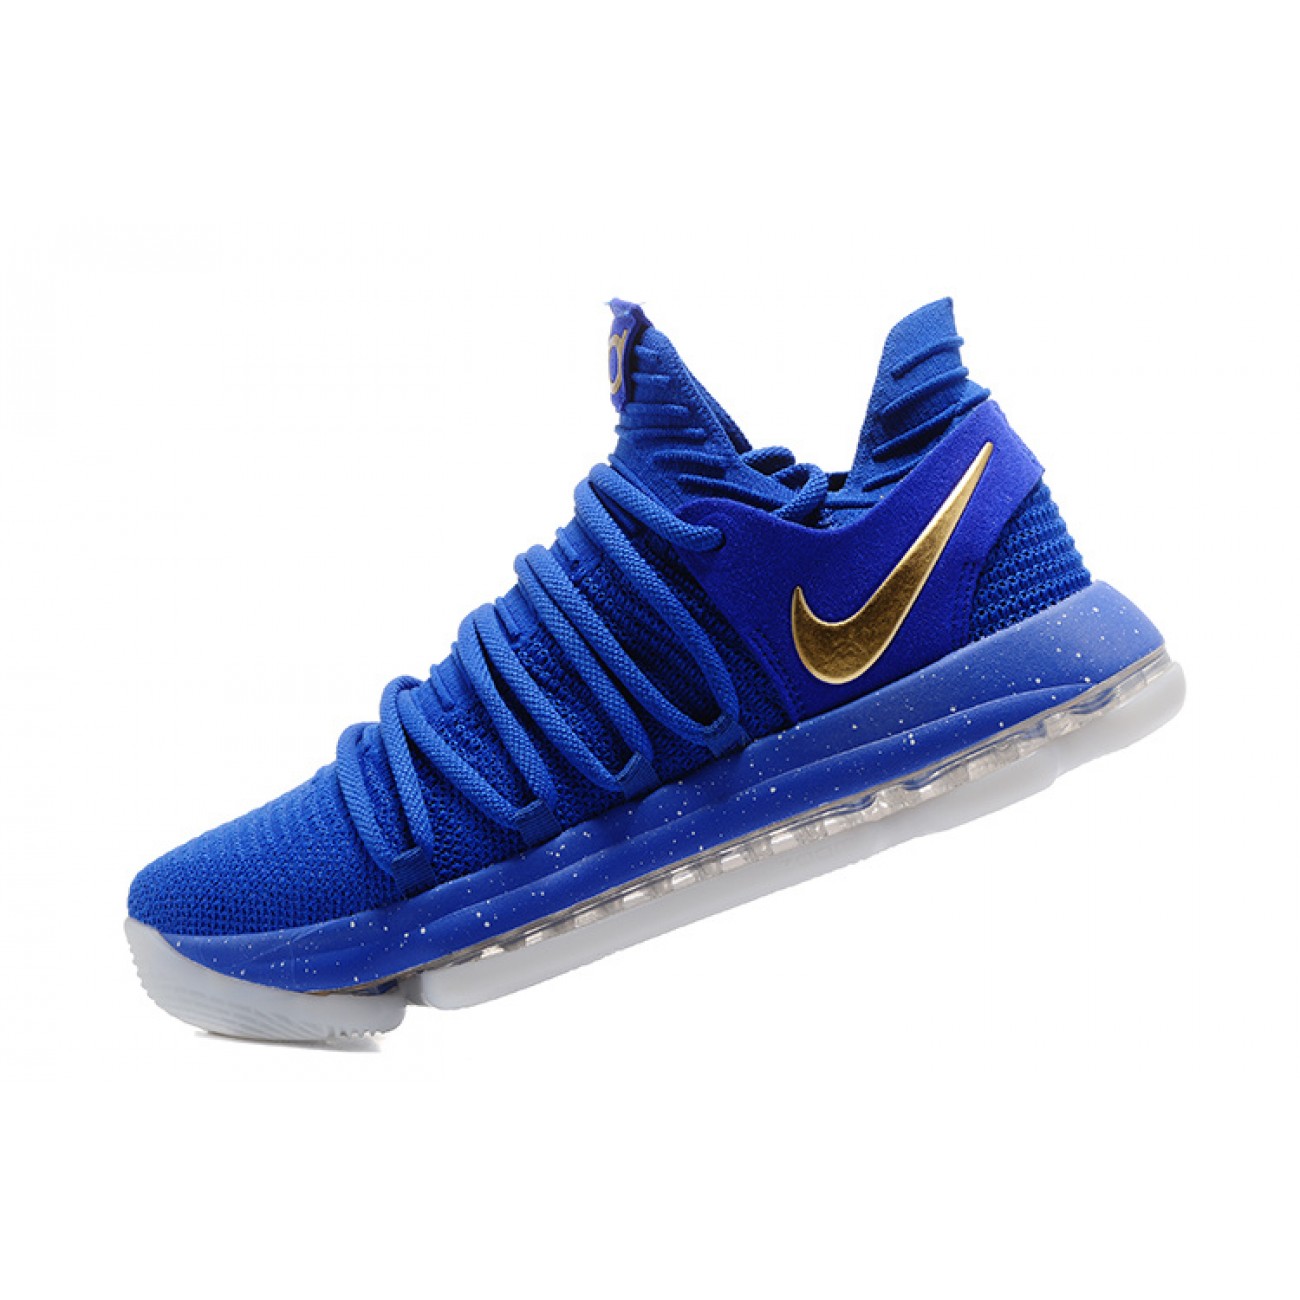 Nike Zoom Kevin Durant KD10 EP Ocean Blue/Gold